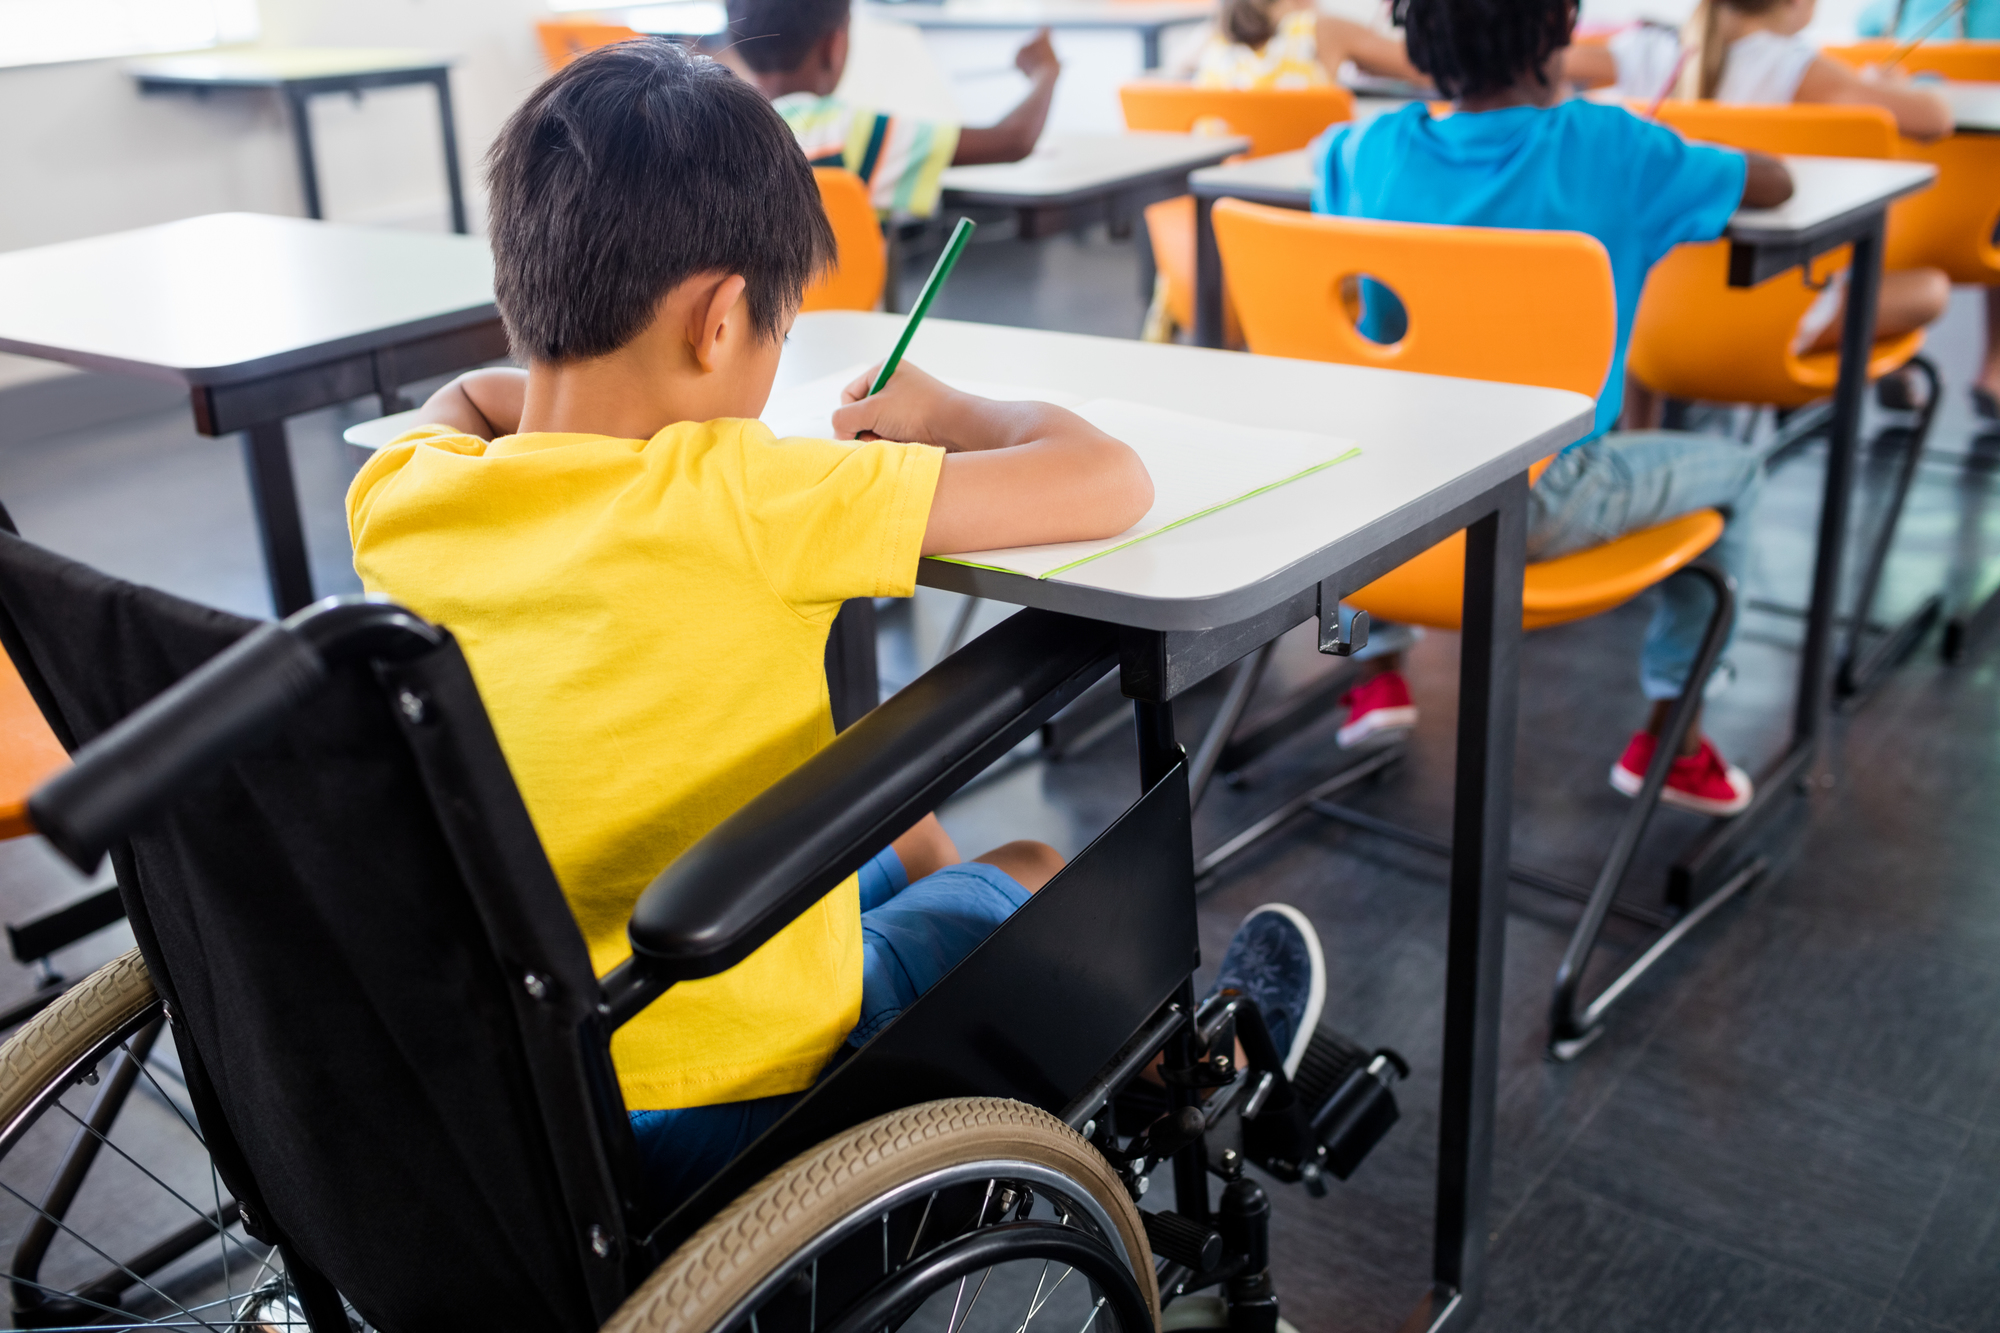 A pupil in wheel chair working at his desk at school